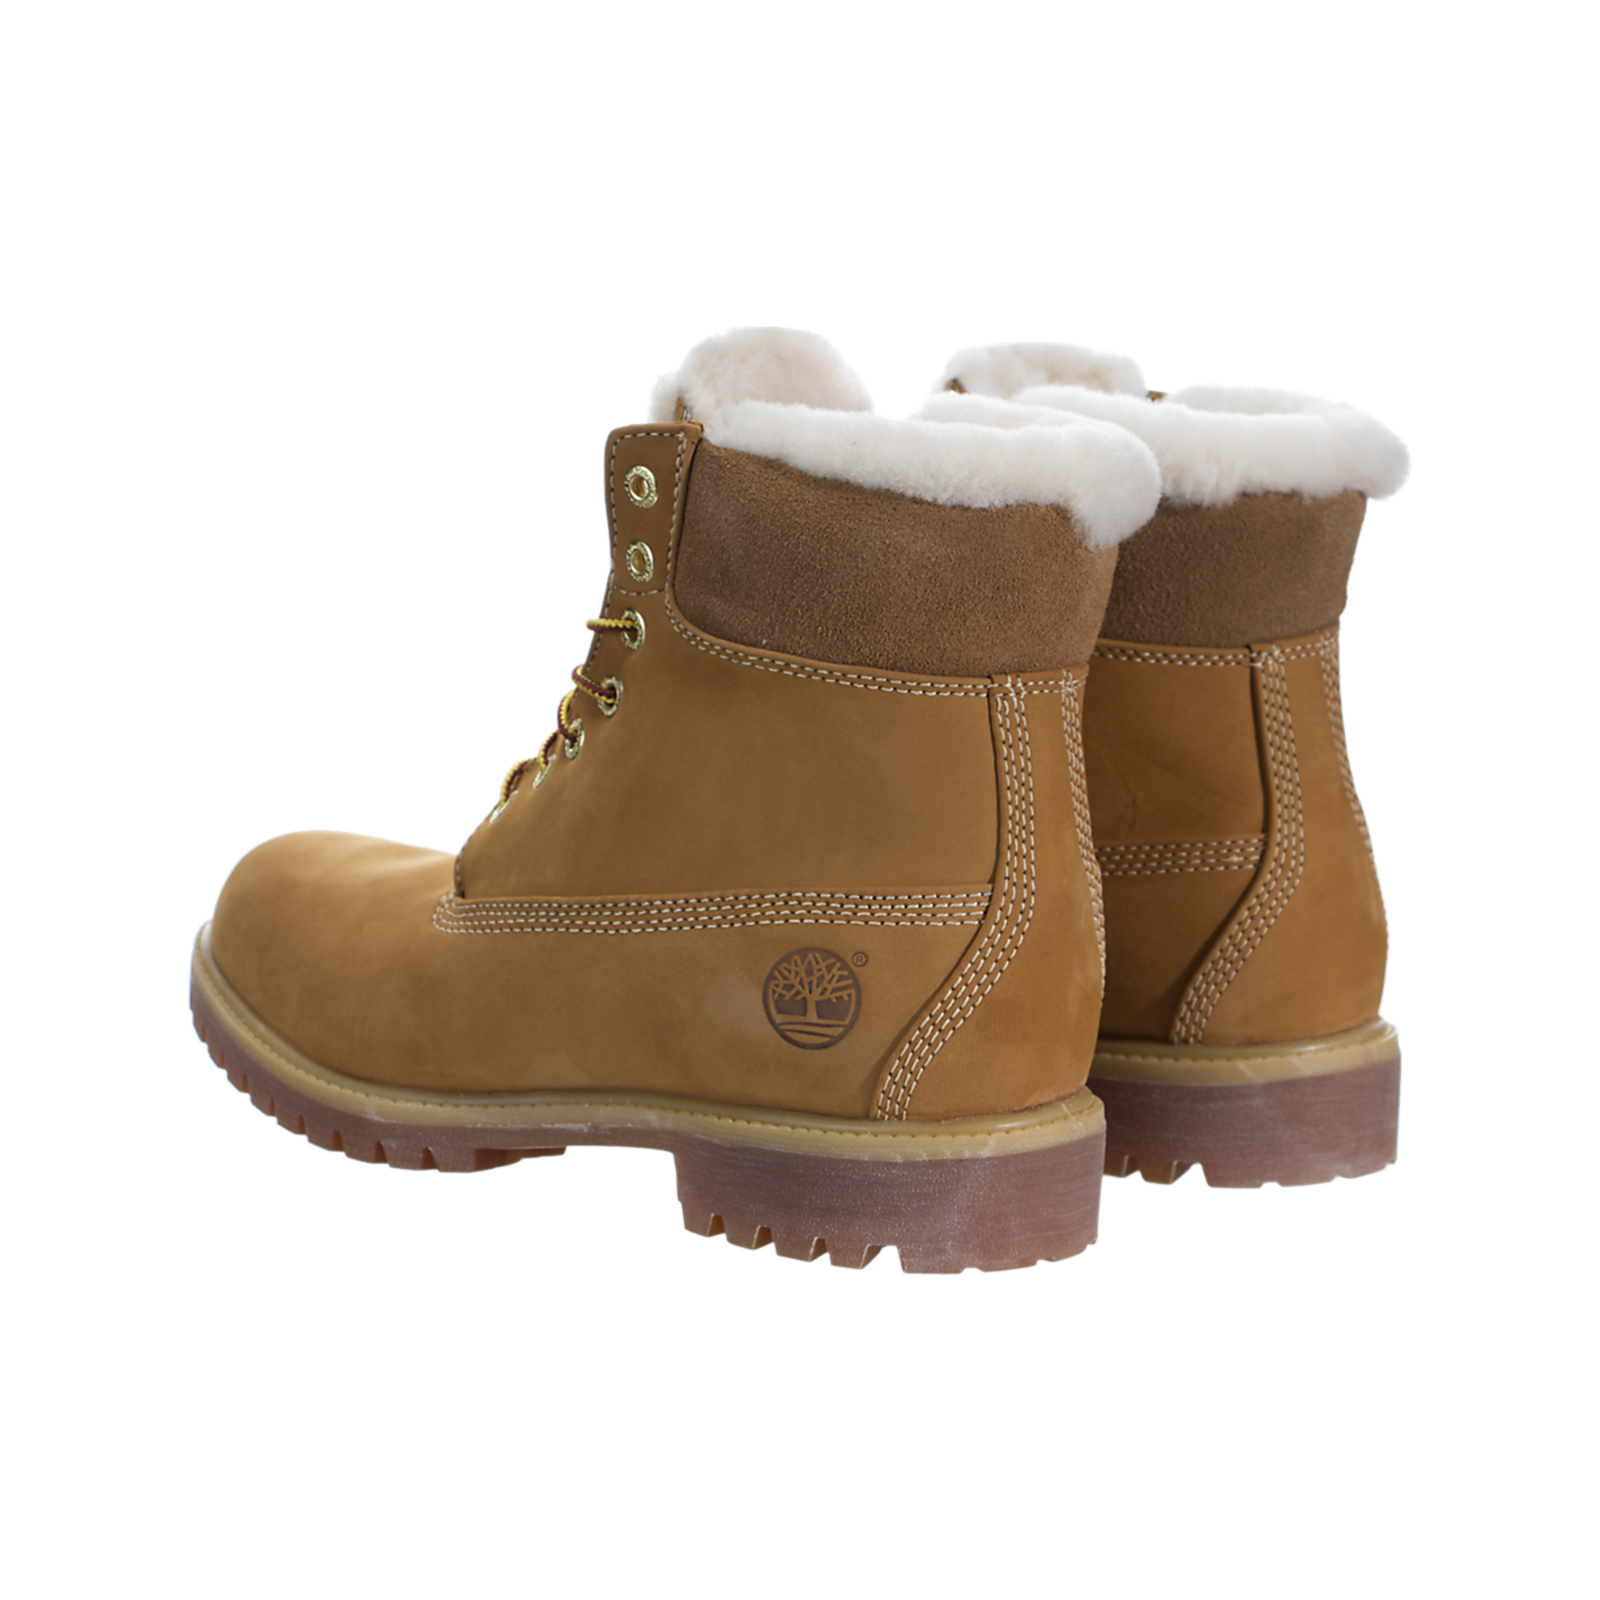 Timberland 6 Inch Fur Lined Boots - tb018027 - Sneakerhead.com ...